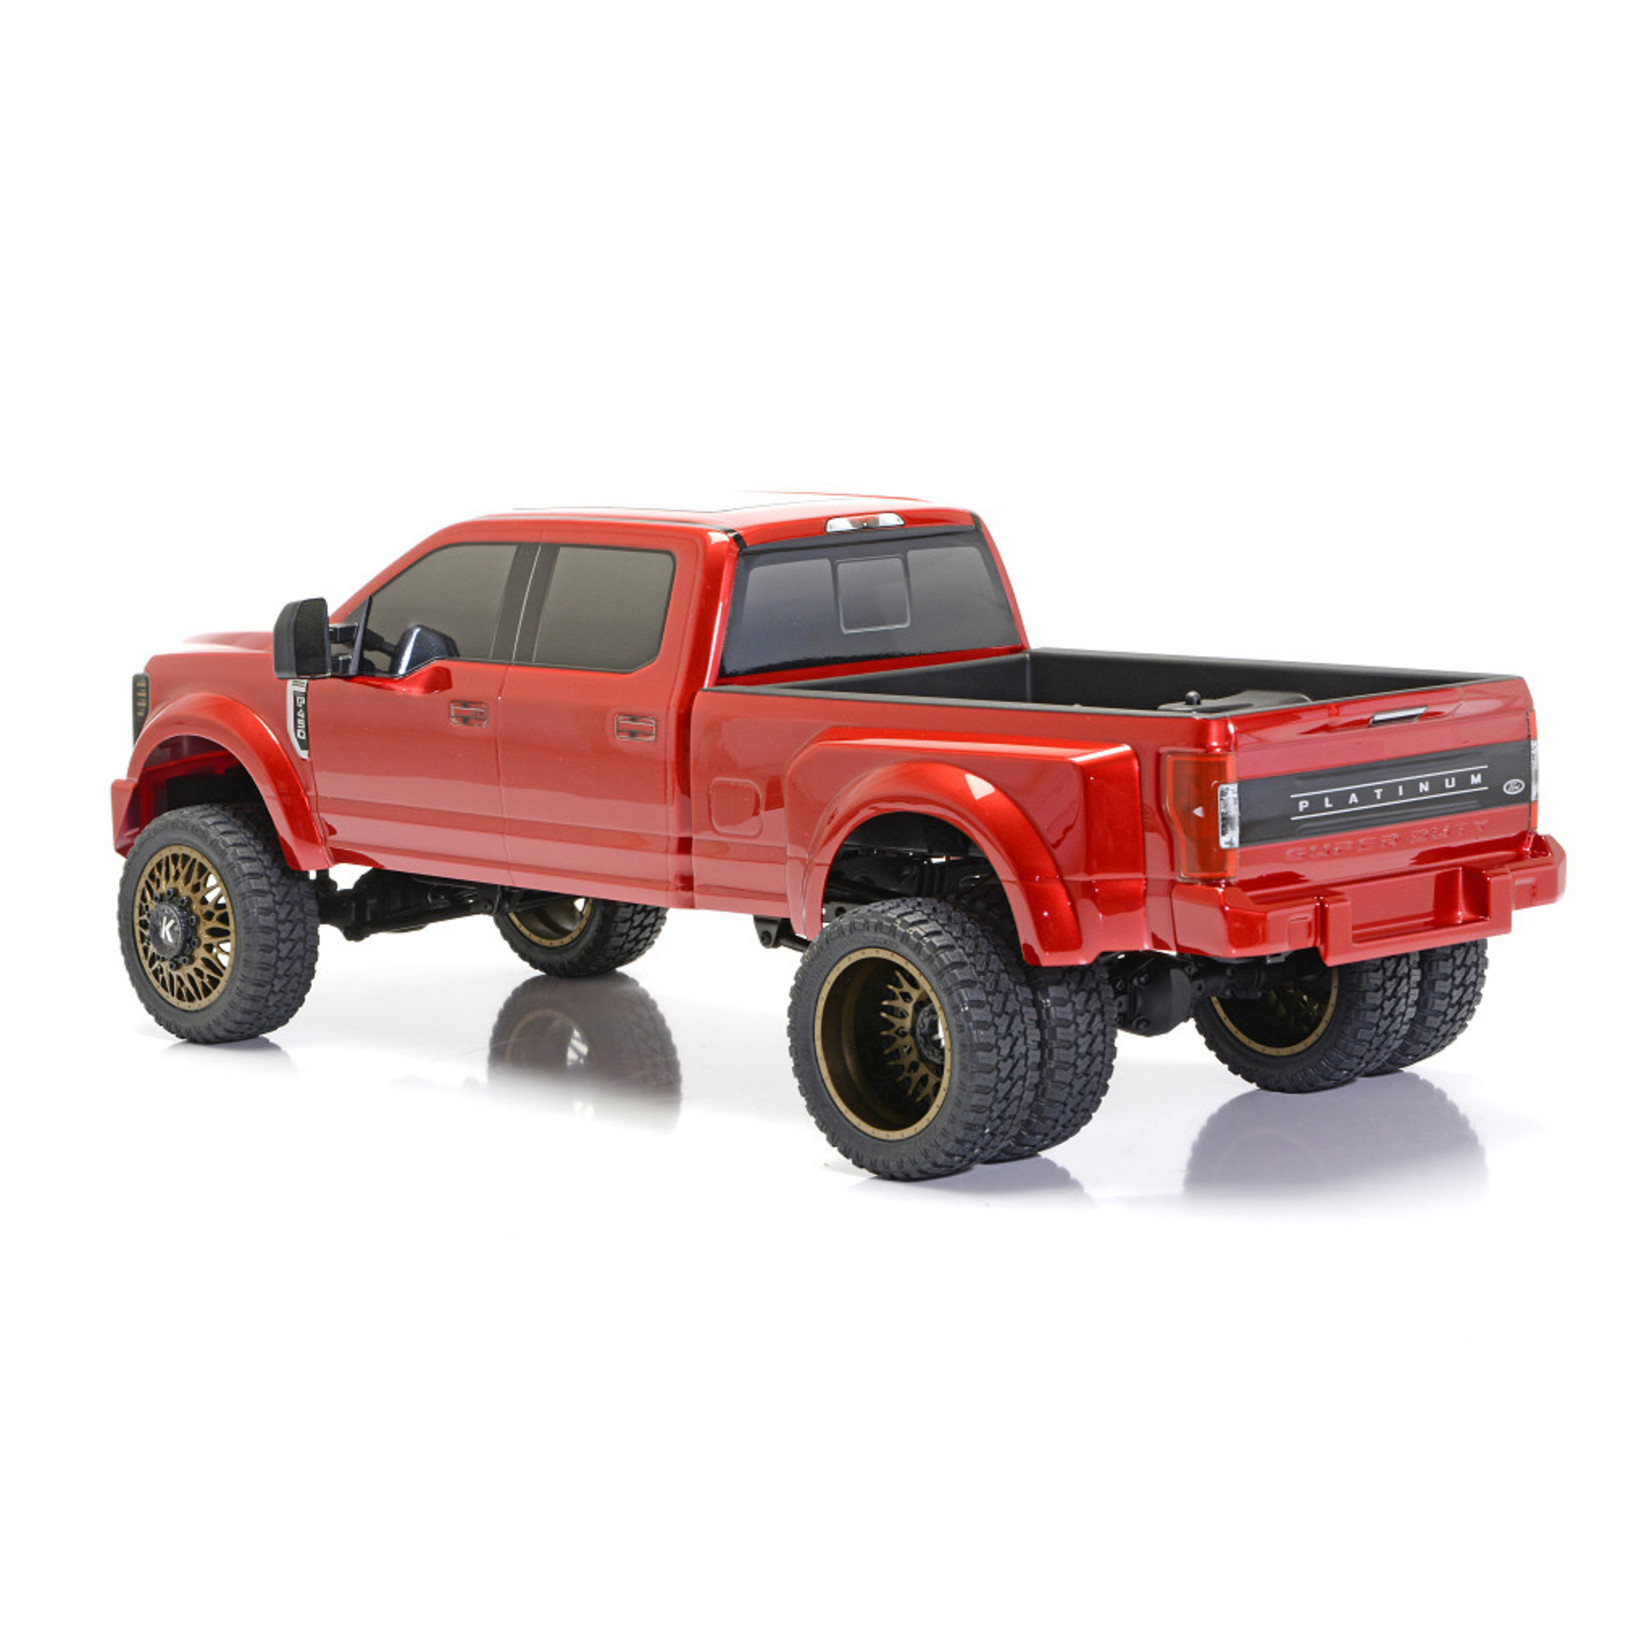 CEN Racing CEG8982    Ford F450 1/10 4WD Solid Axle RTR Truck - Red Candy Apple